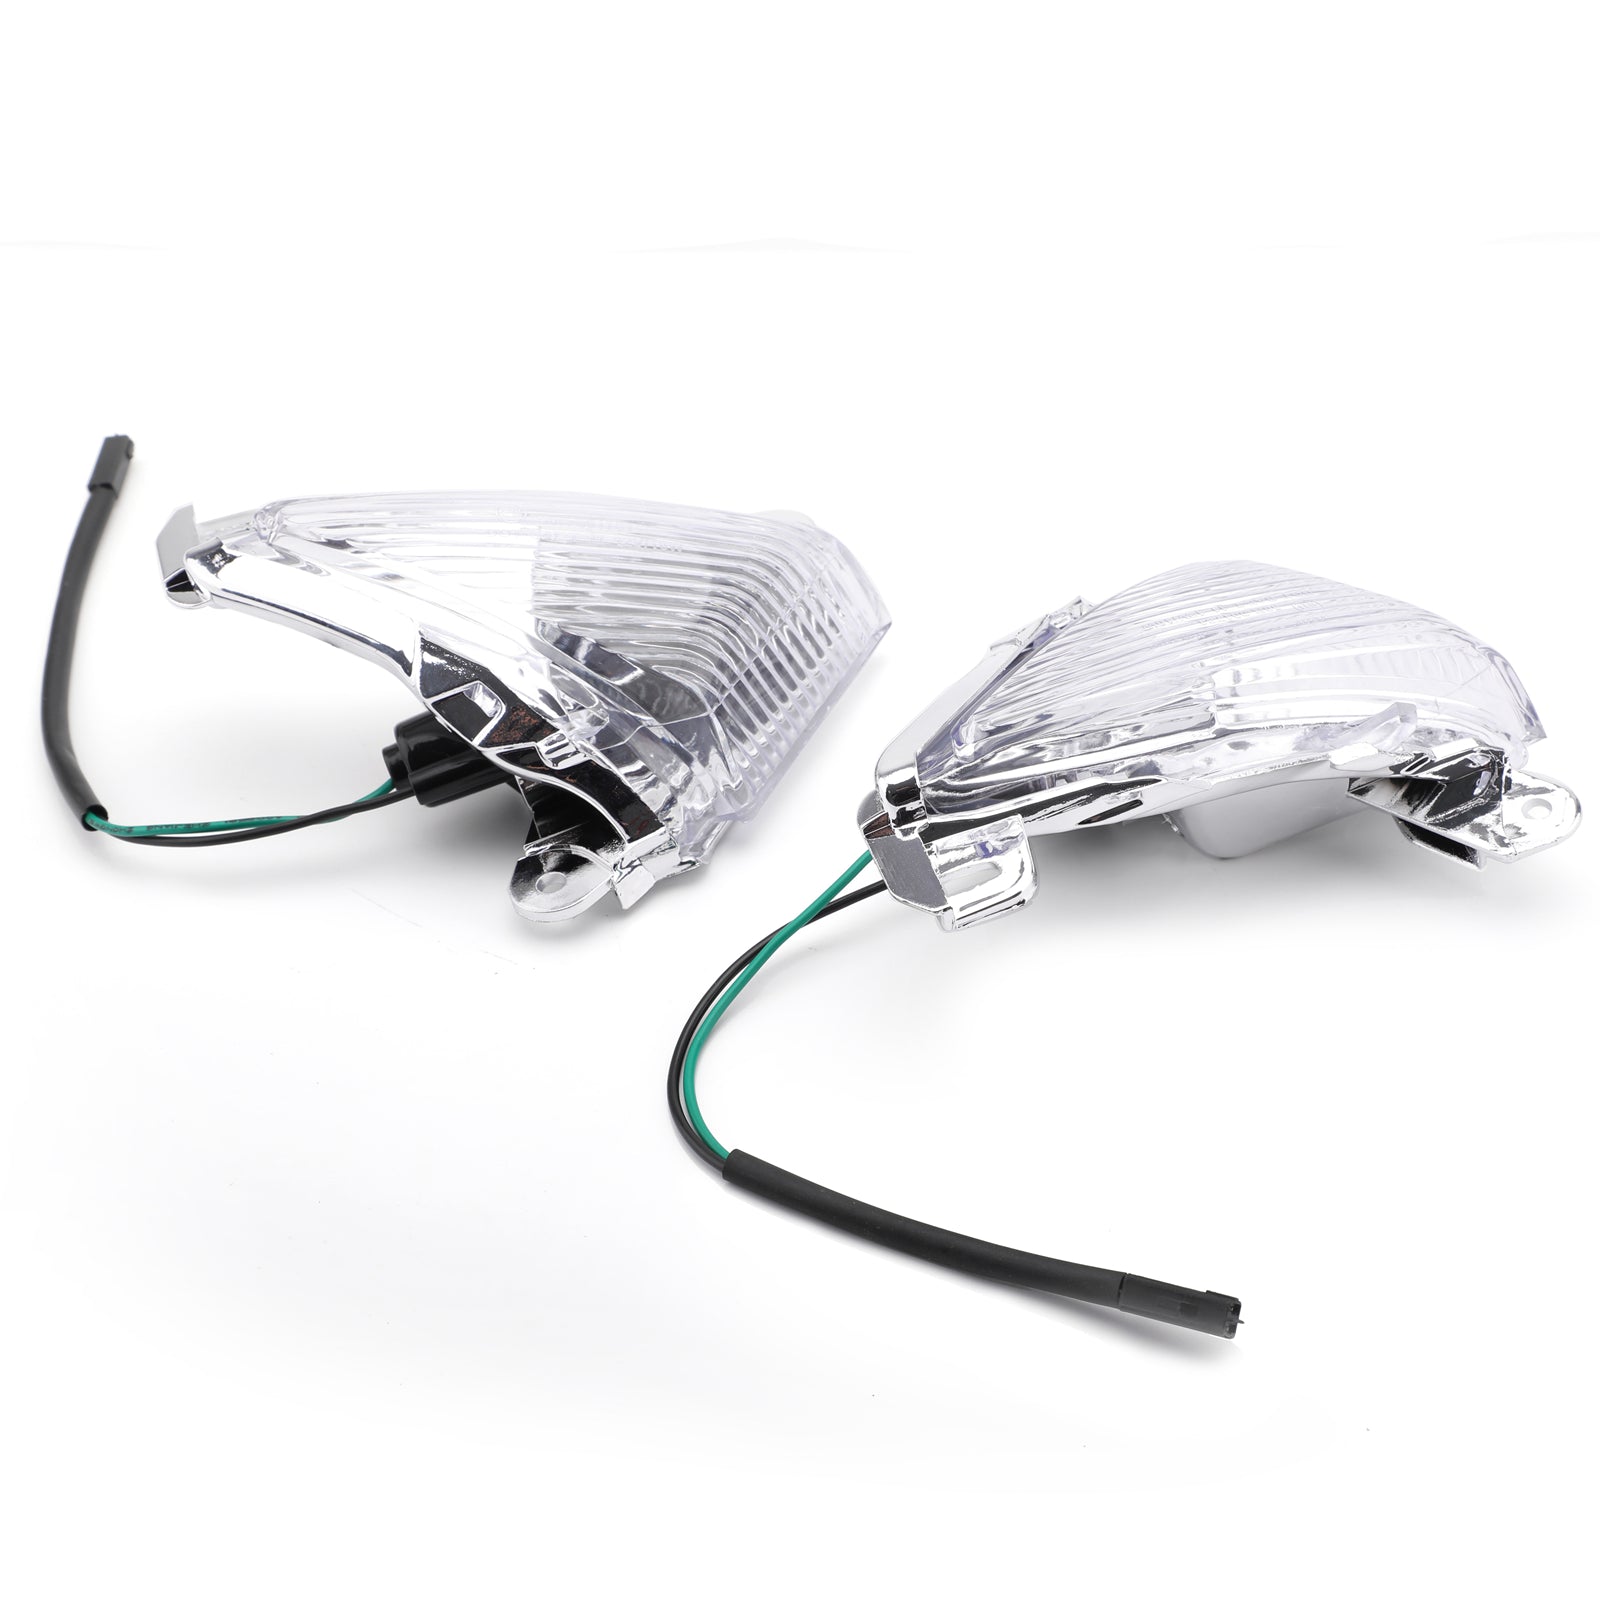 Front Turn Signals Lens For ZX 14R 10R 6R 636 Ninja 650F Clear